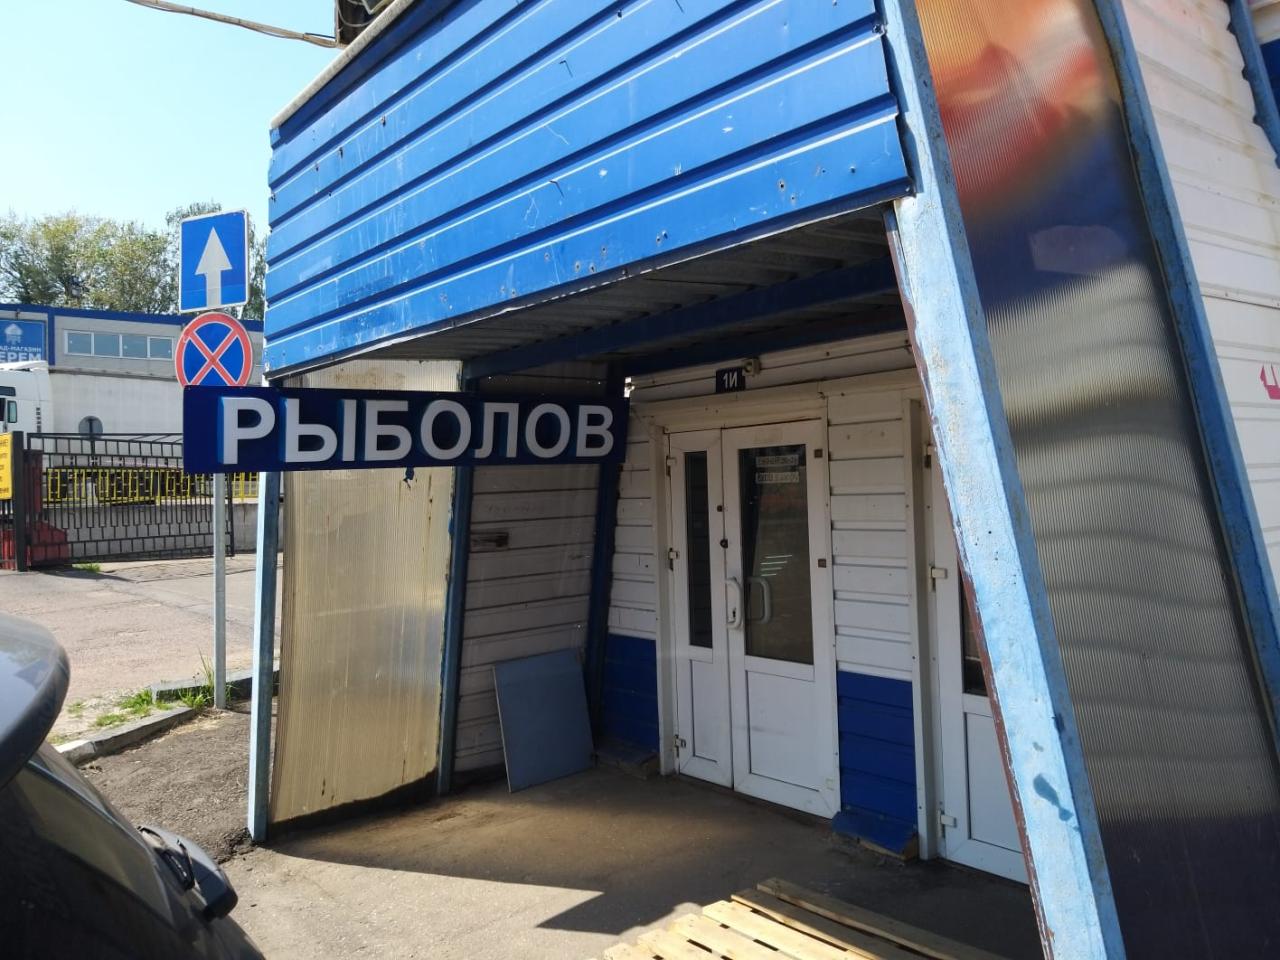 Fishing store in Odintsovo